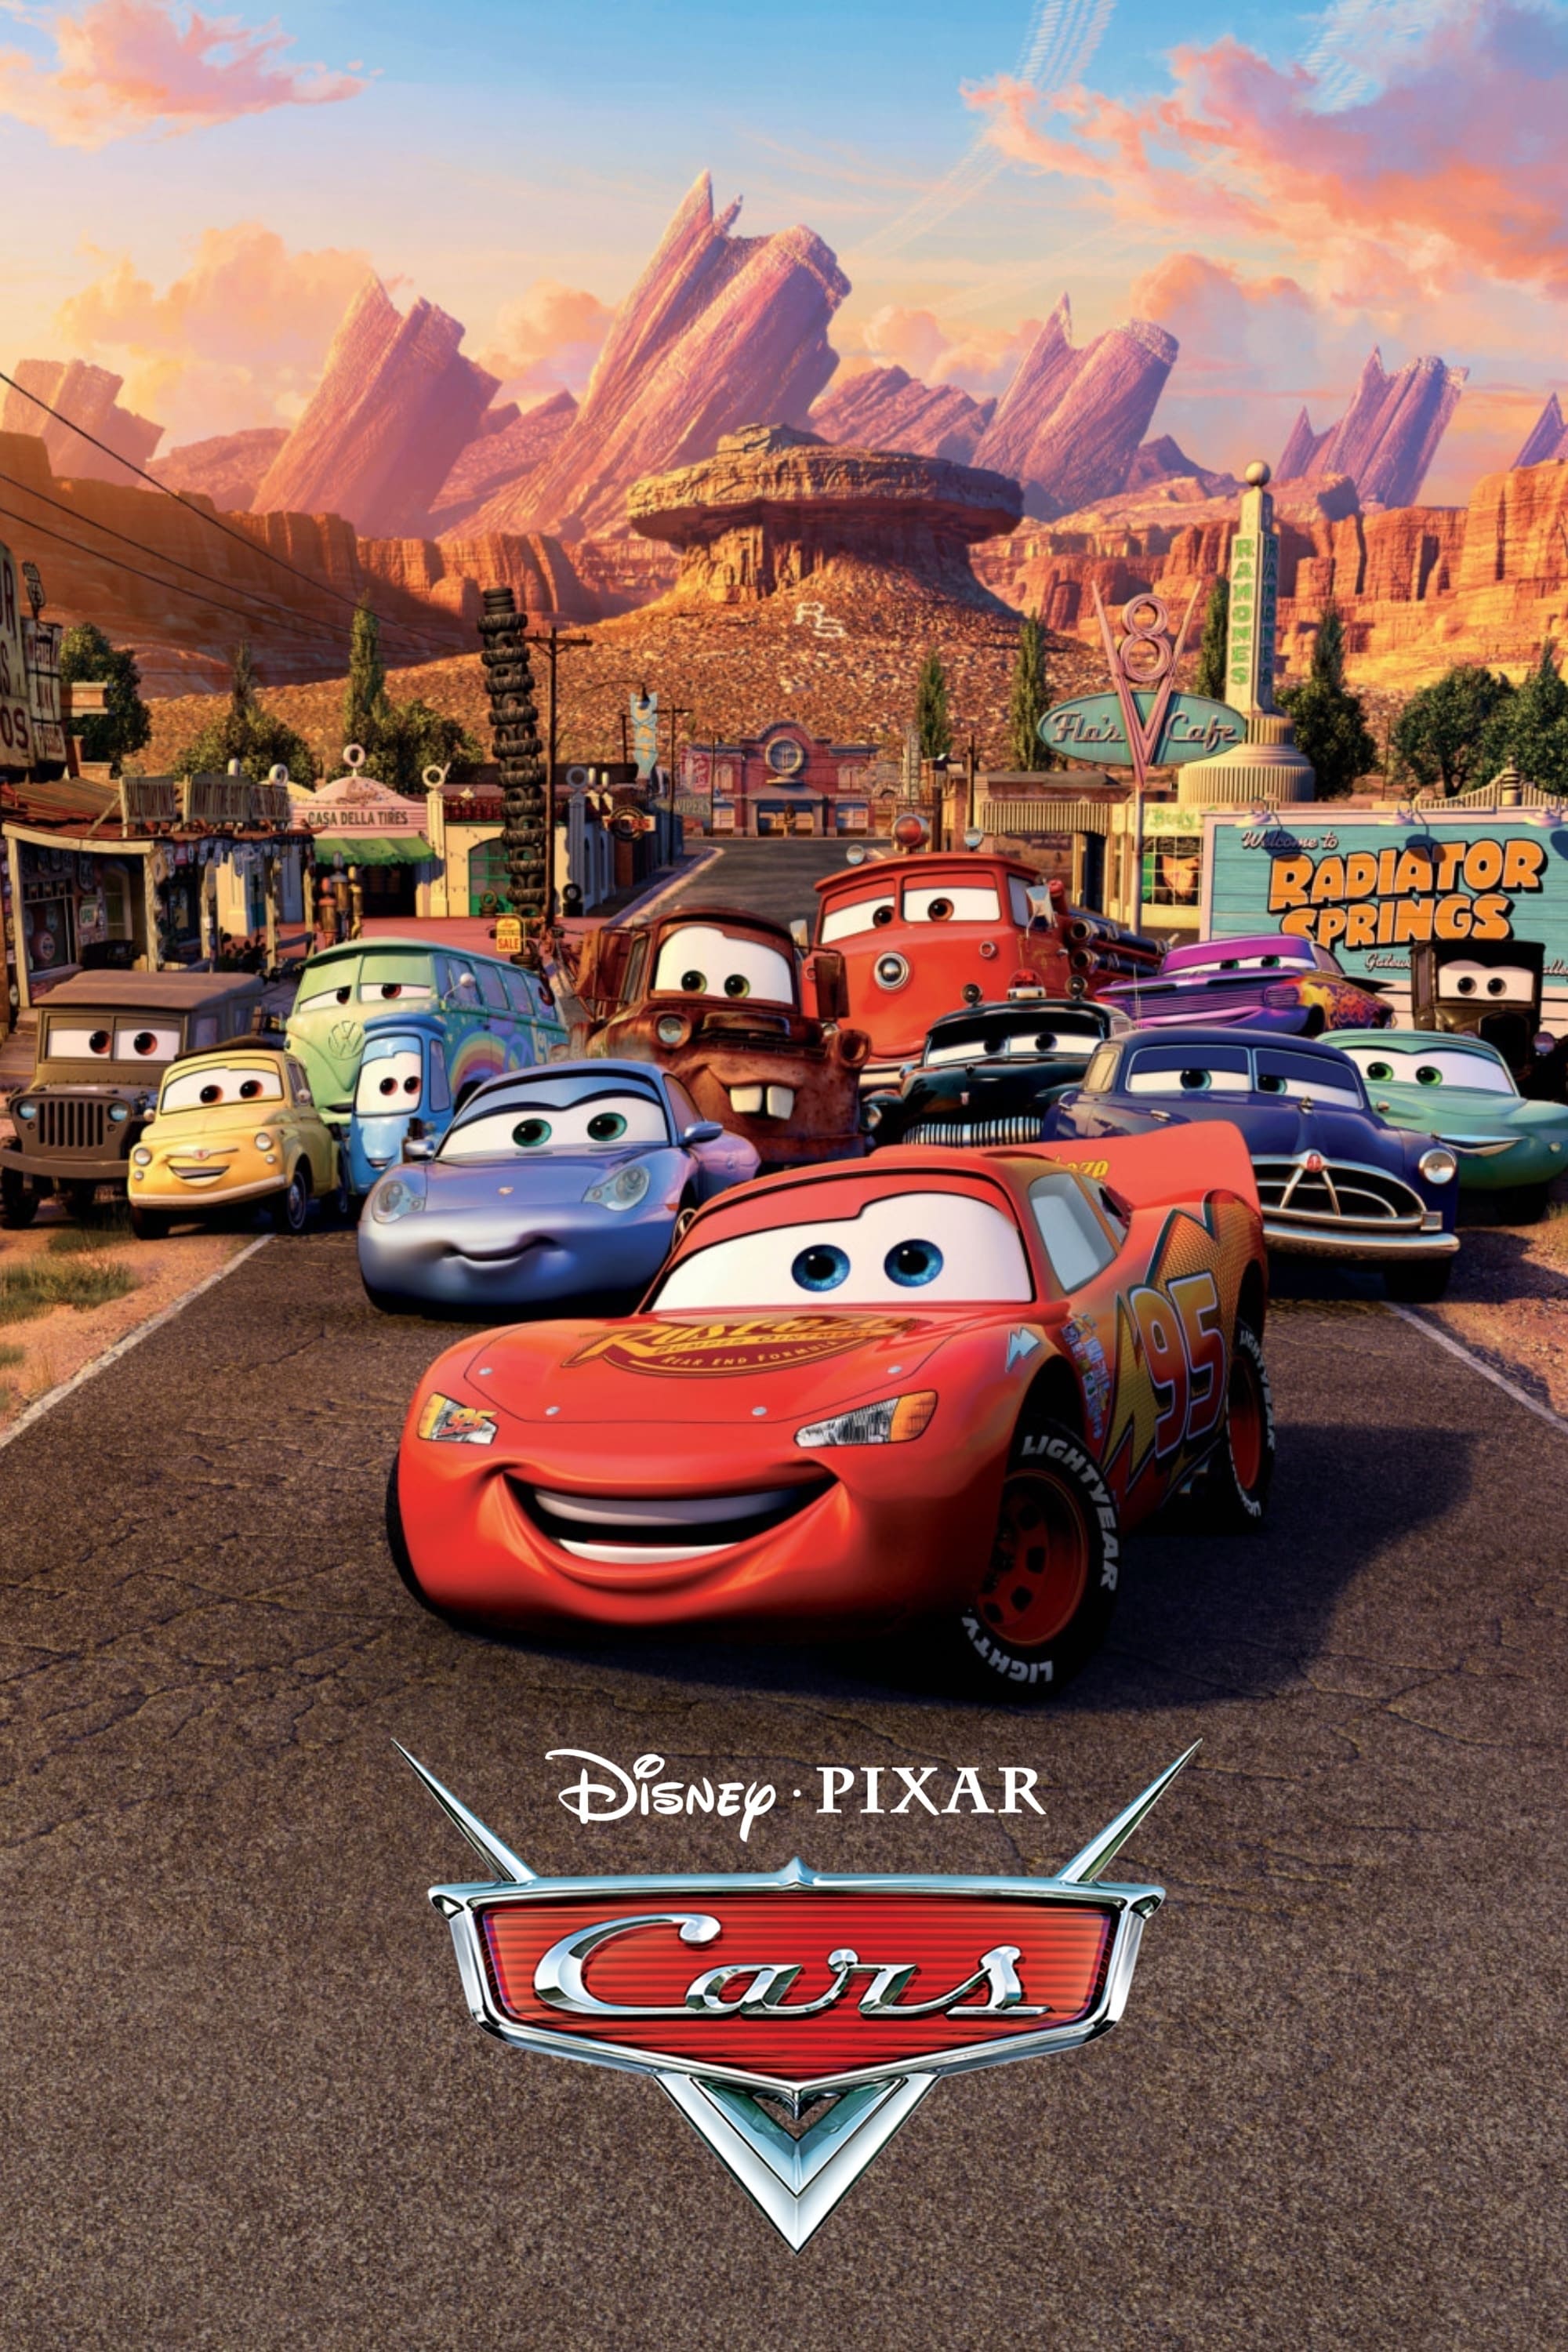 Cars Movie poster